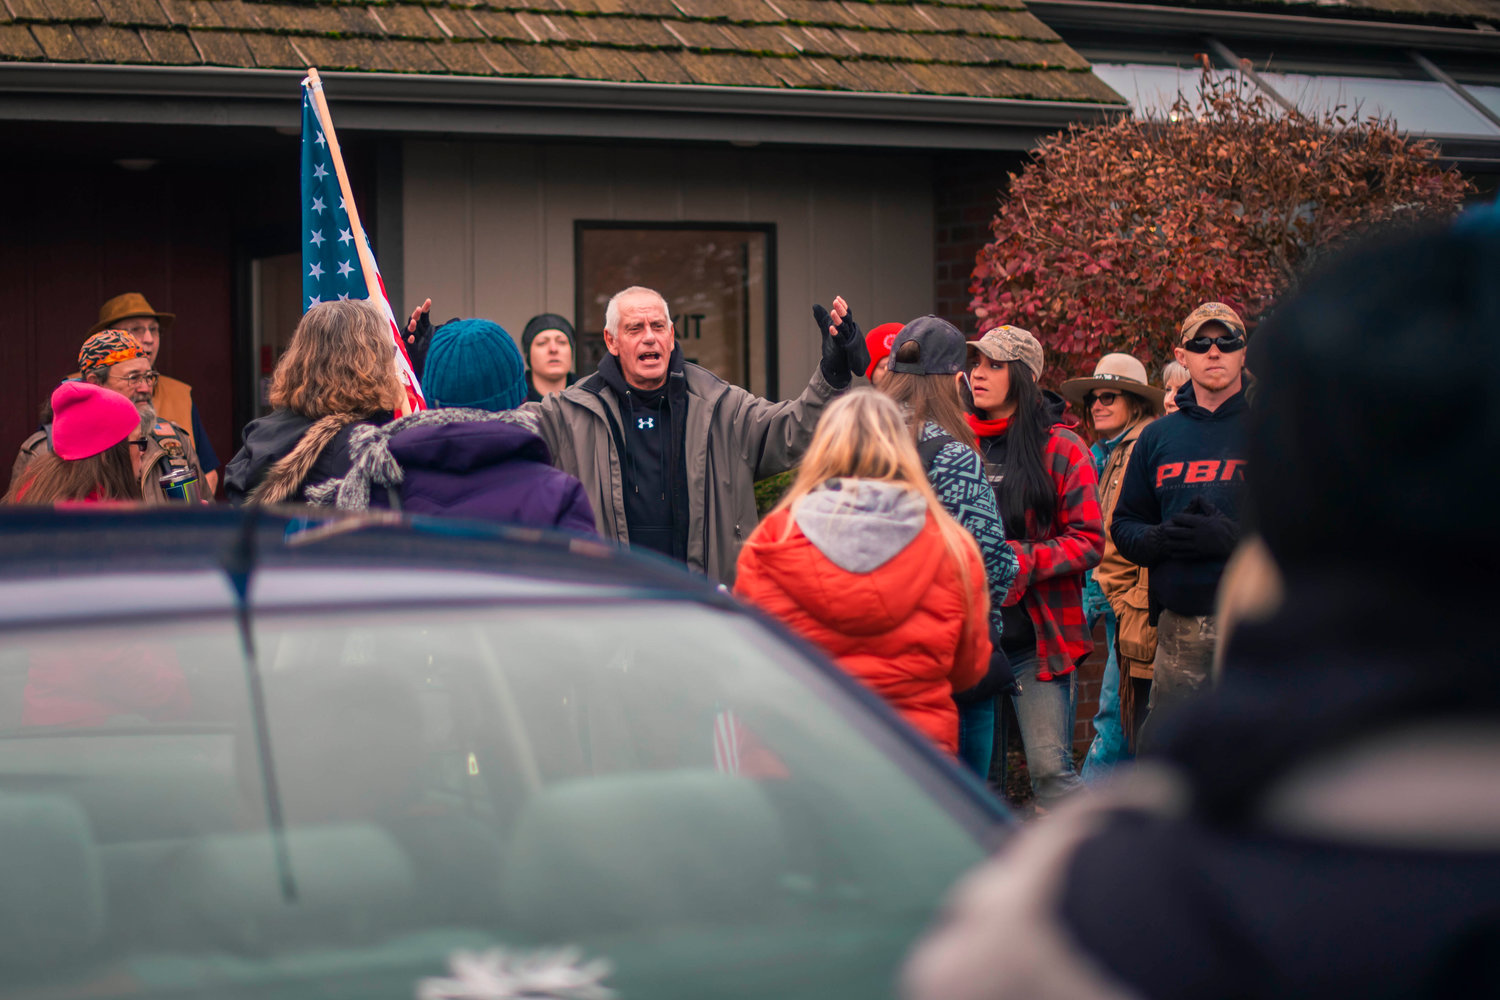 Crowds congregate near the enterance of Spiffy’s some holding flags during ‘peaceful protests’ on Thursday in Chehalis.